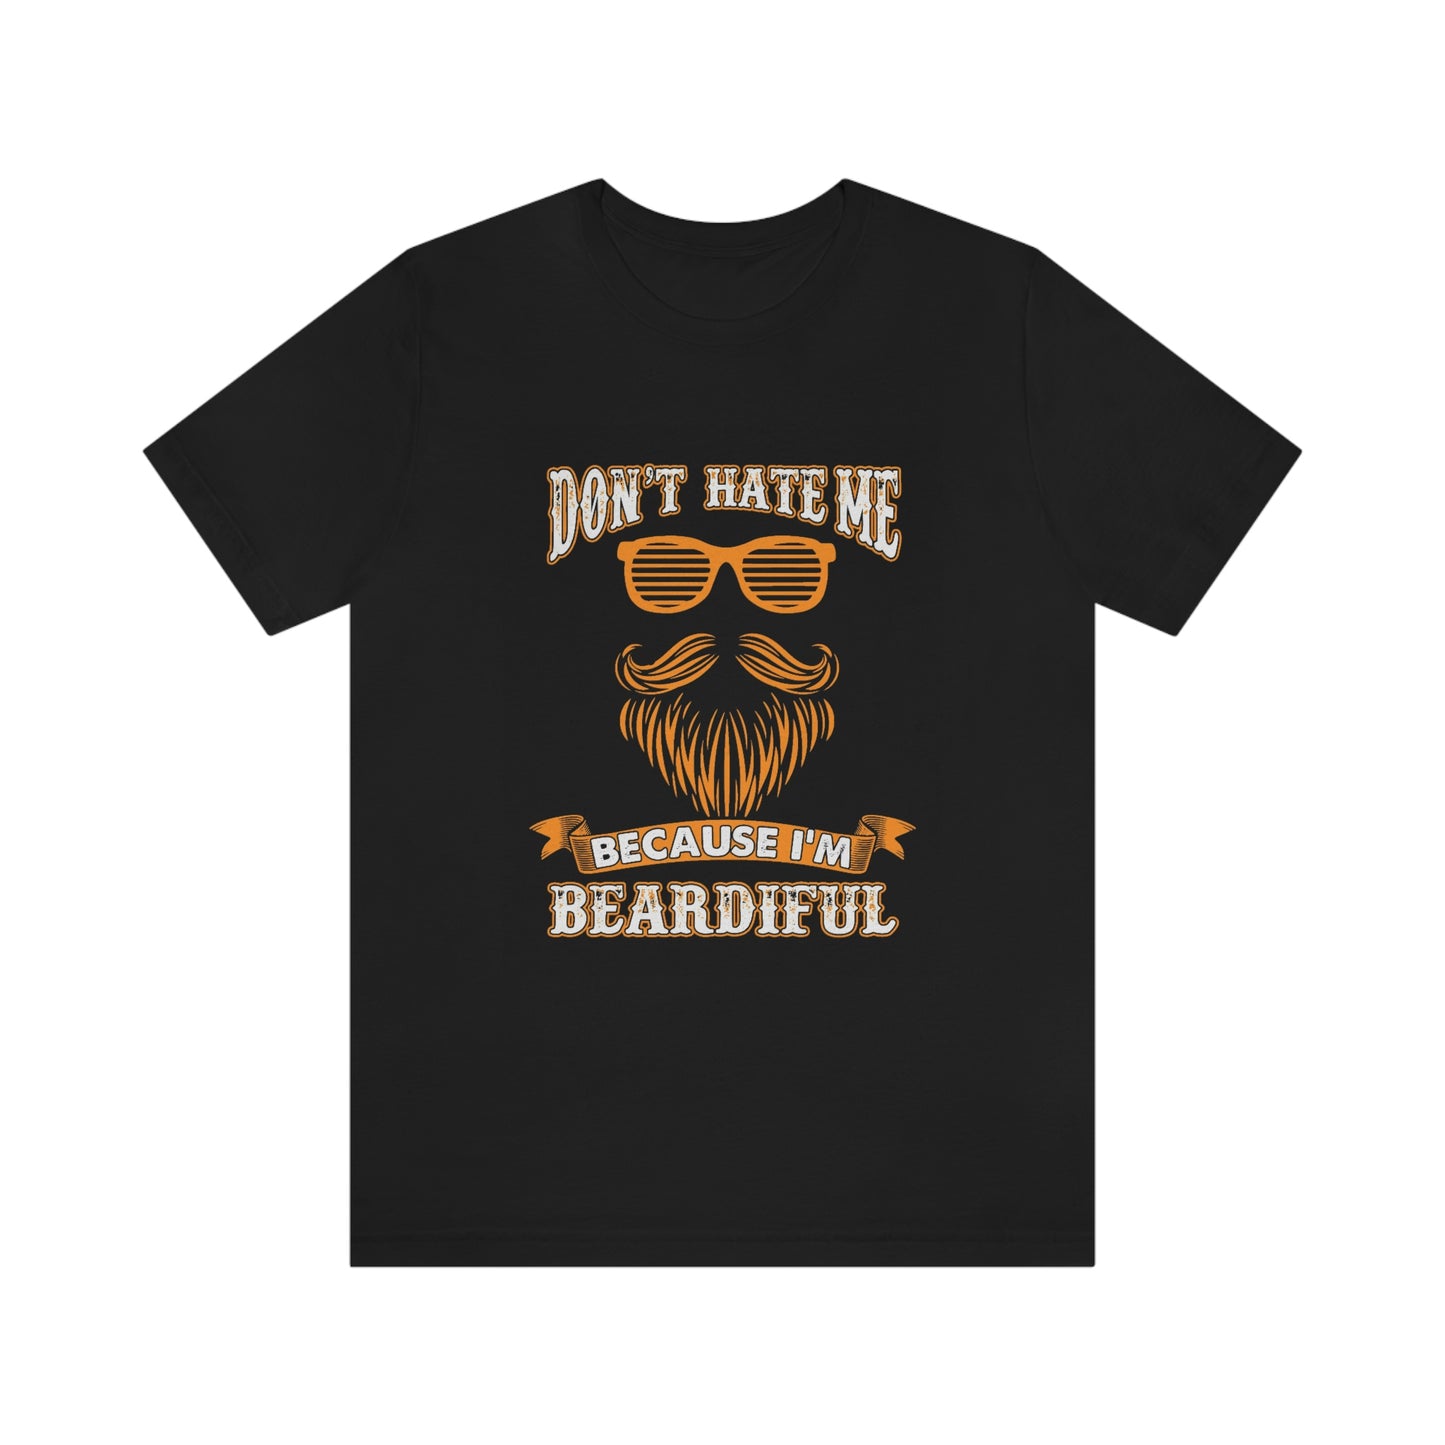 Don’t hate me-Jersey Short Sleeve Tee